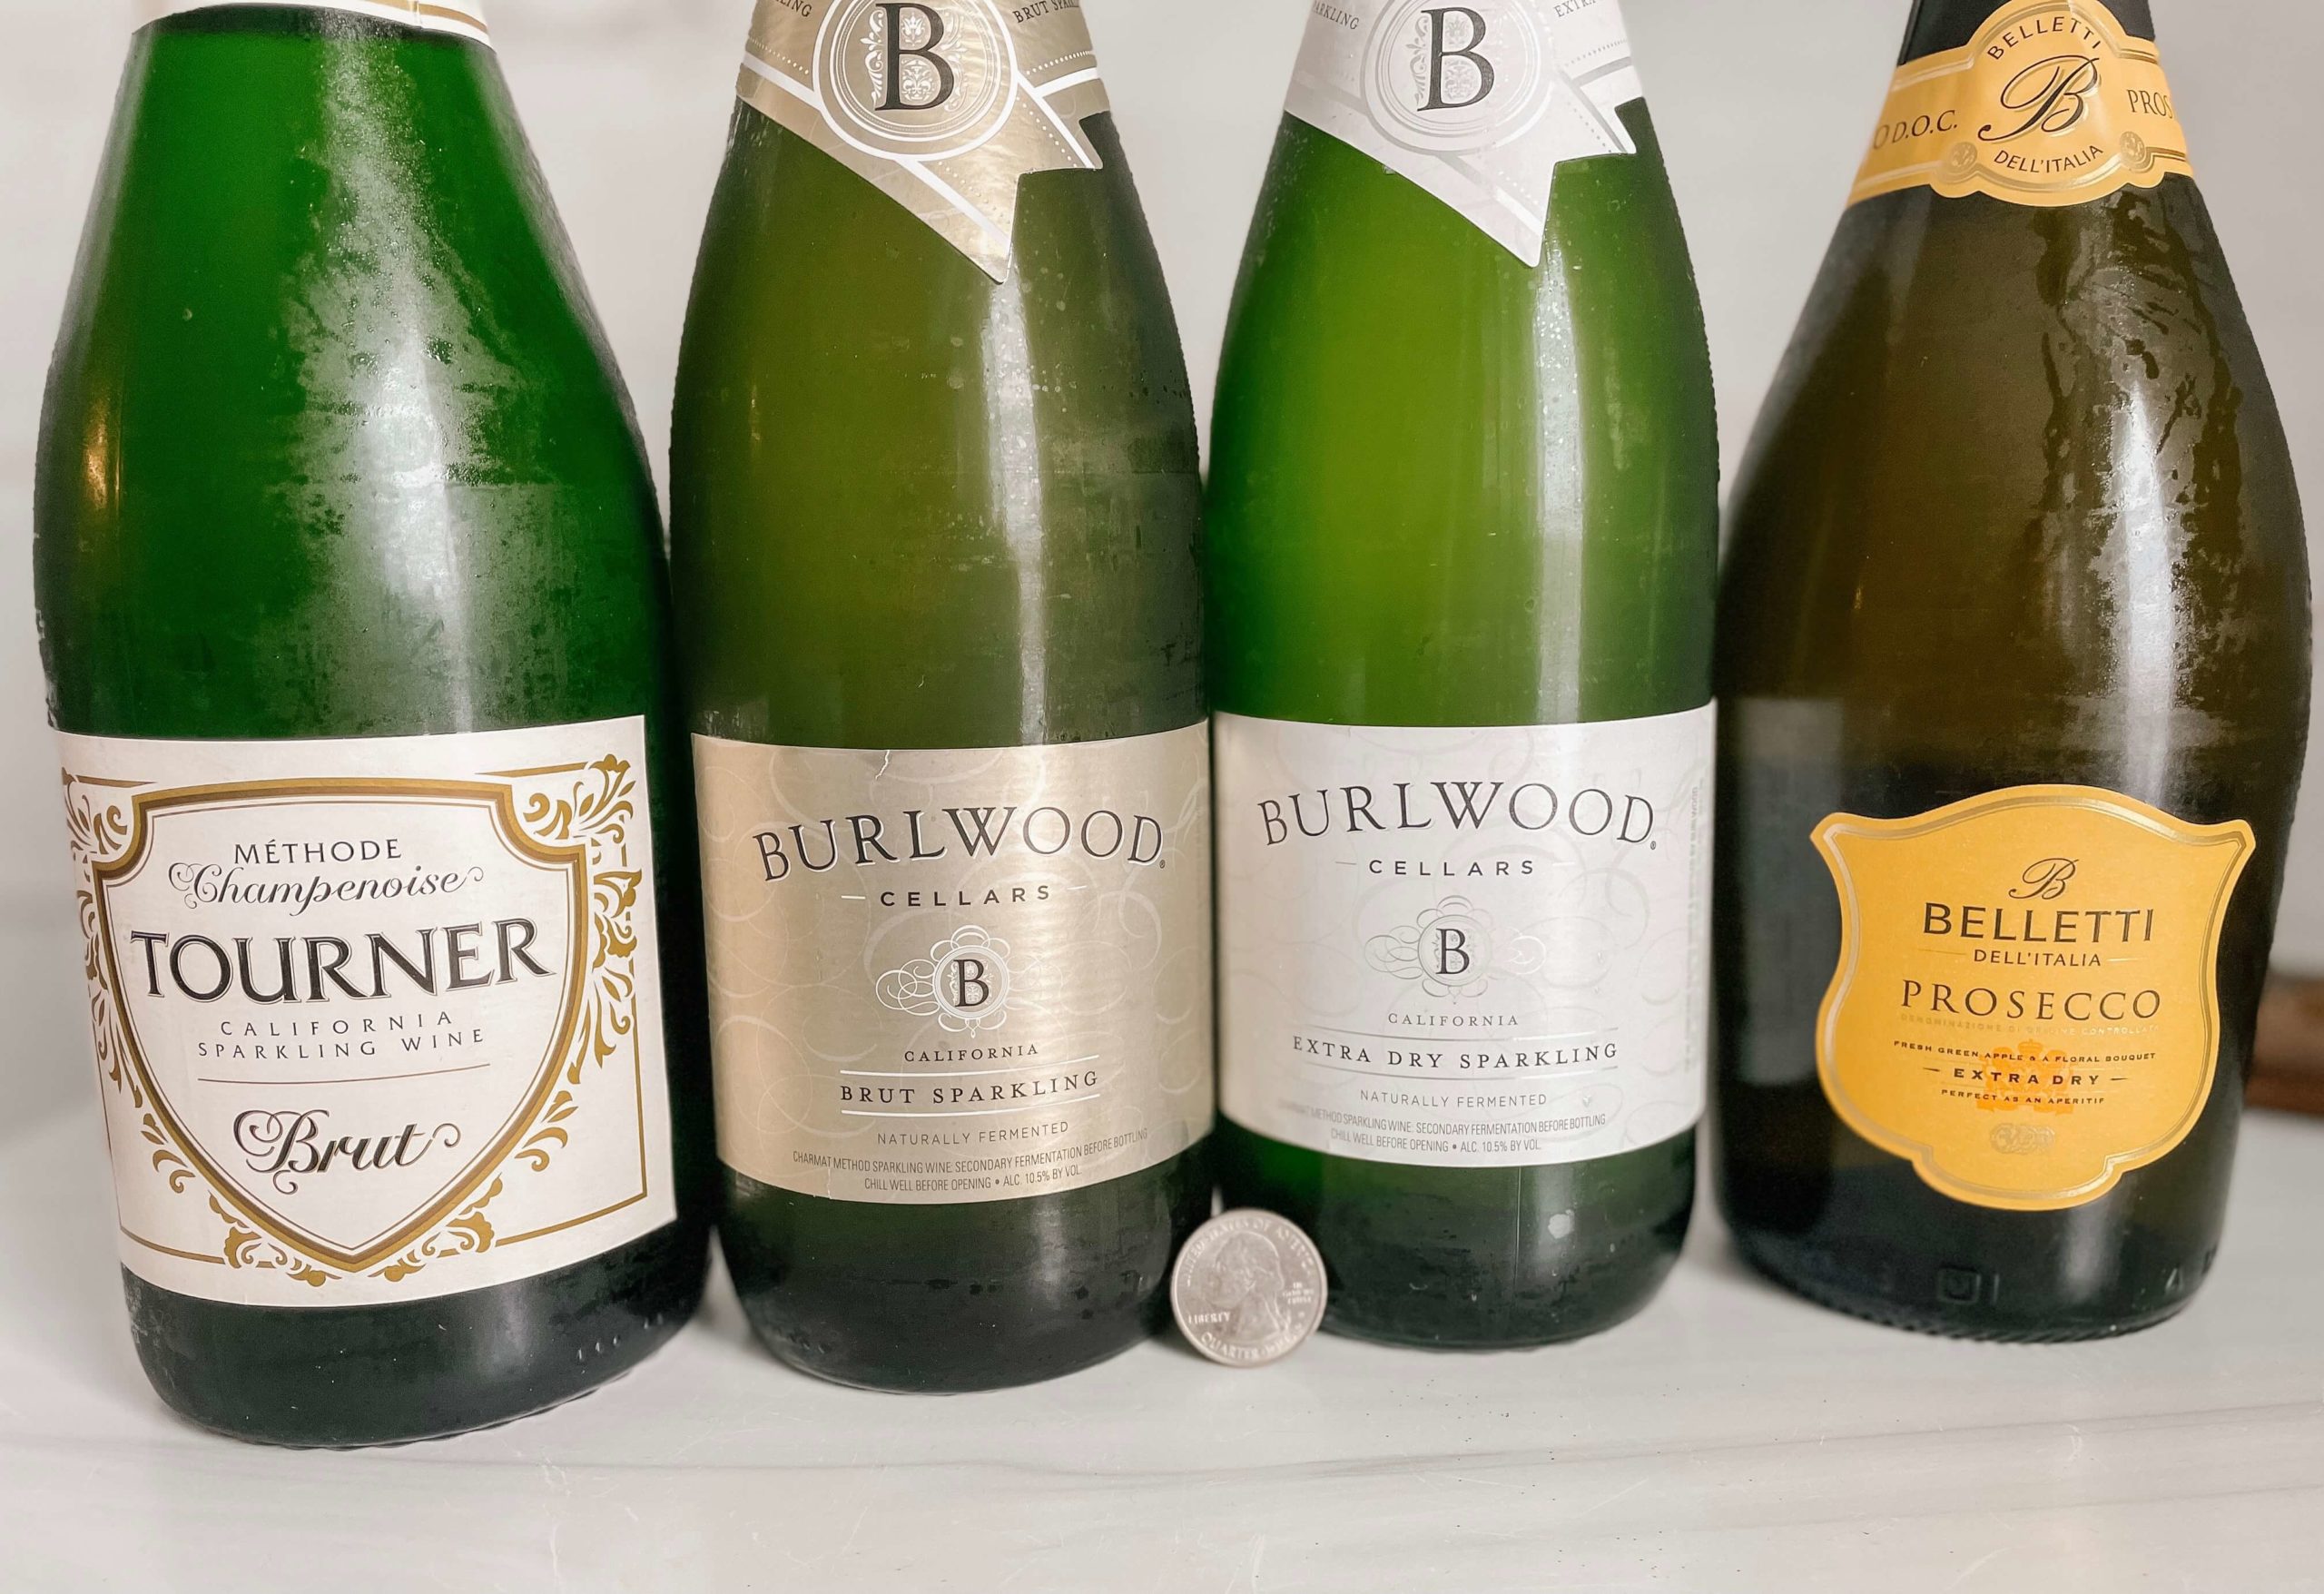 What Is Brut Champagne? Brut vs. Extra-dry Champagne